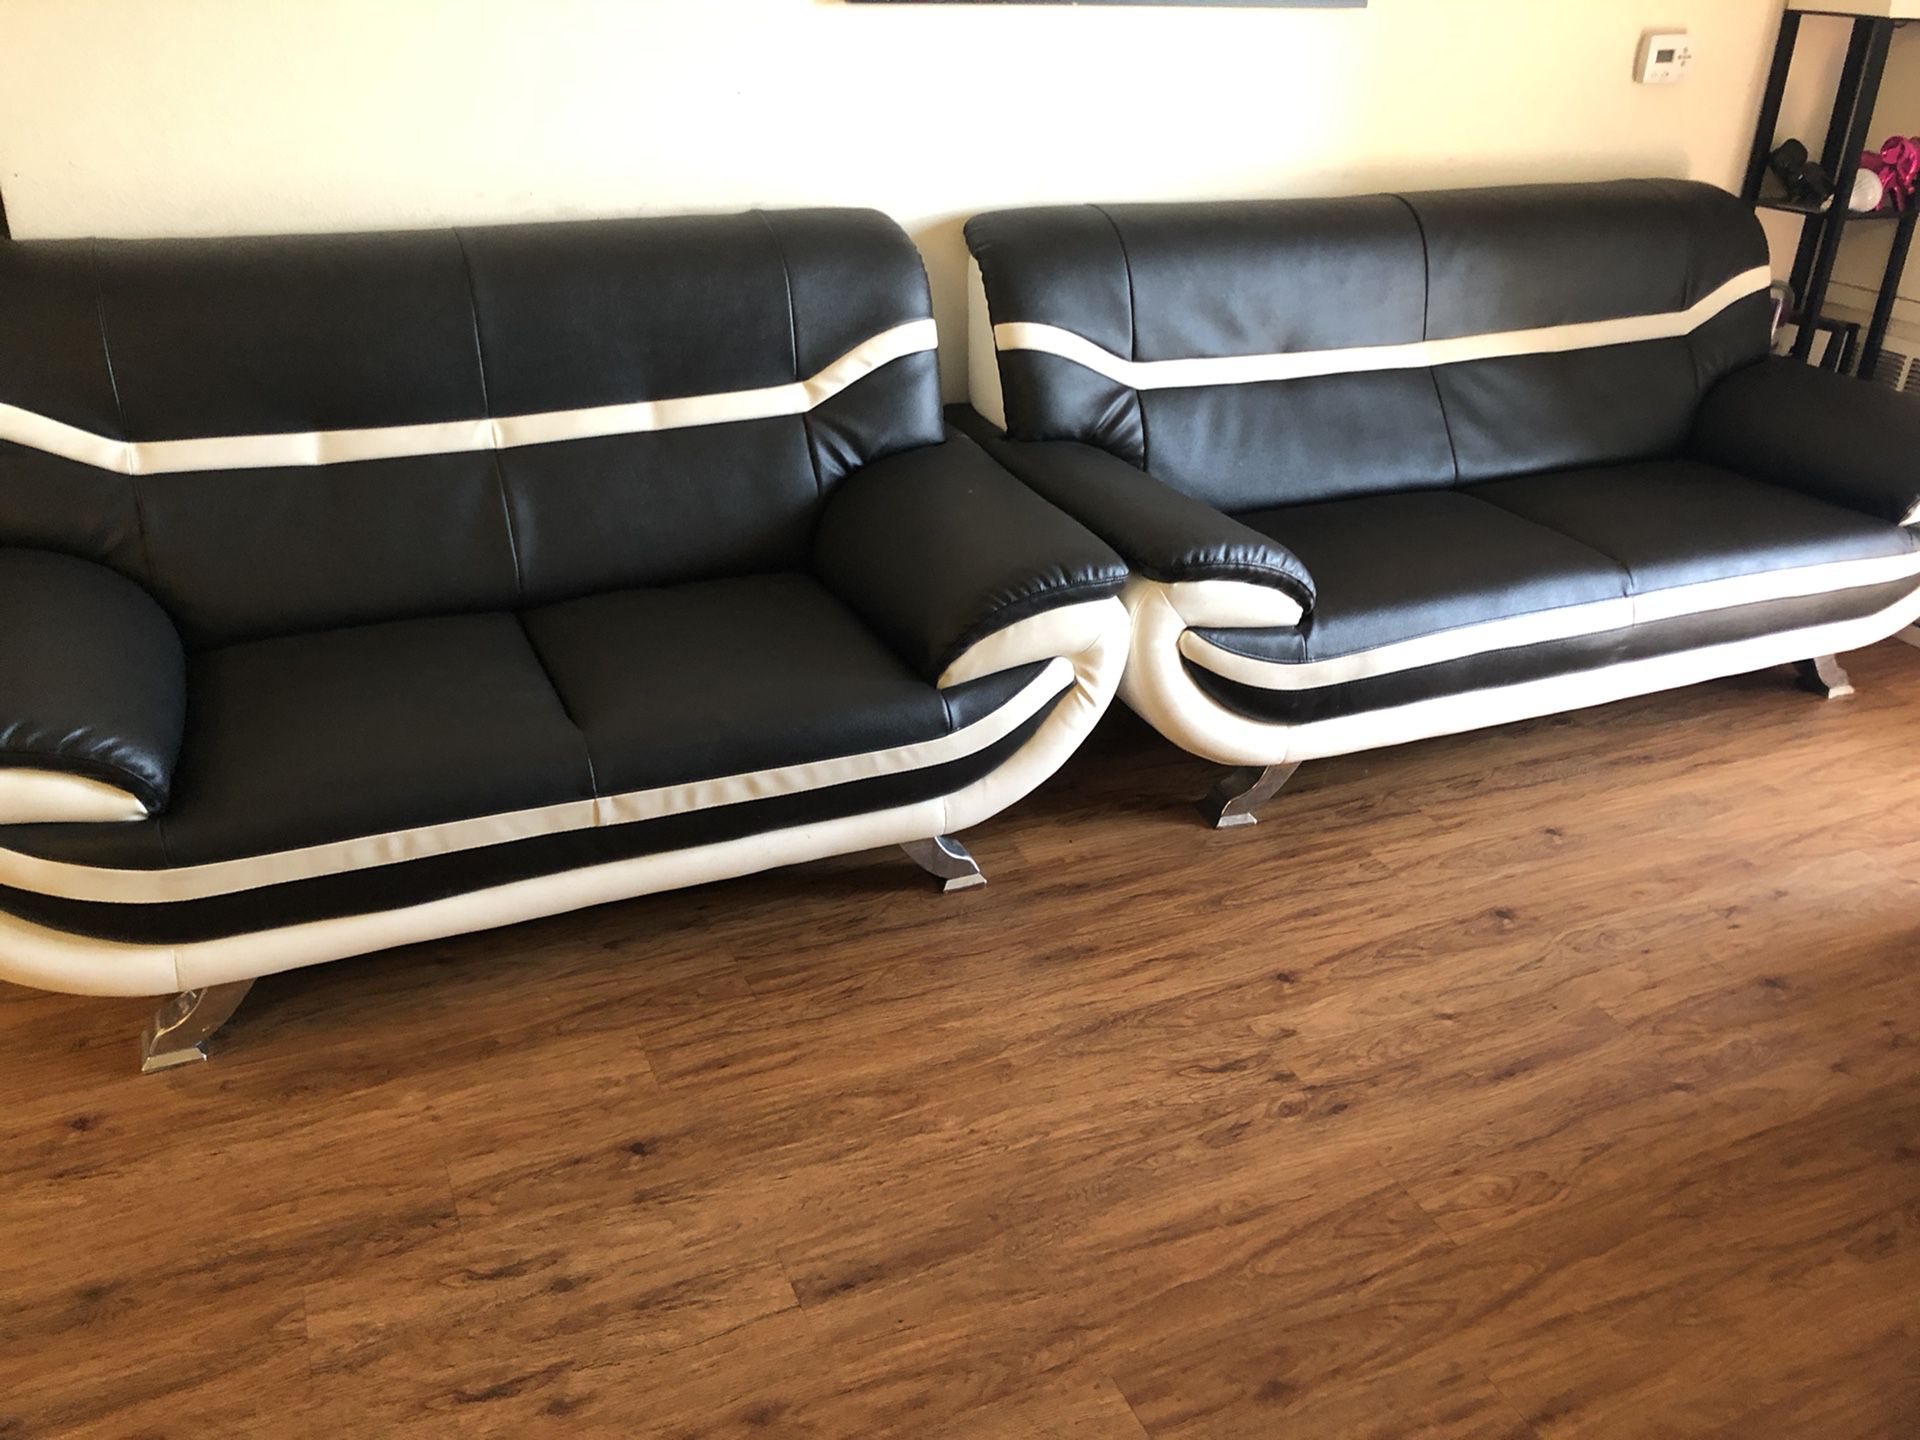 Black & White Leather Couches